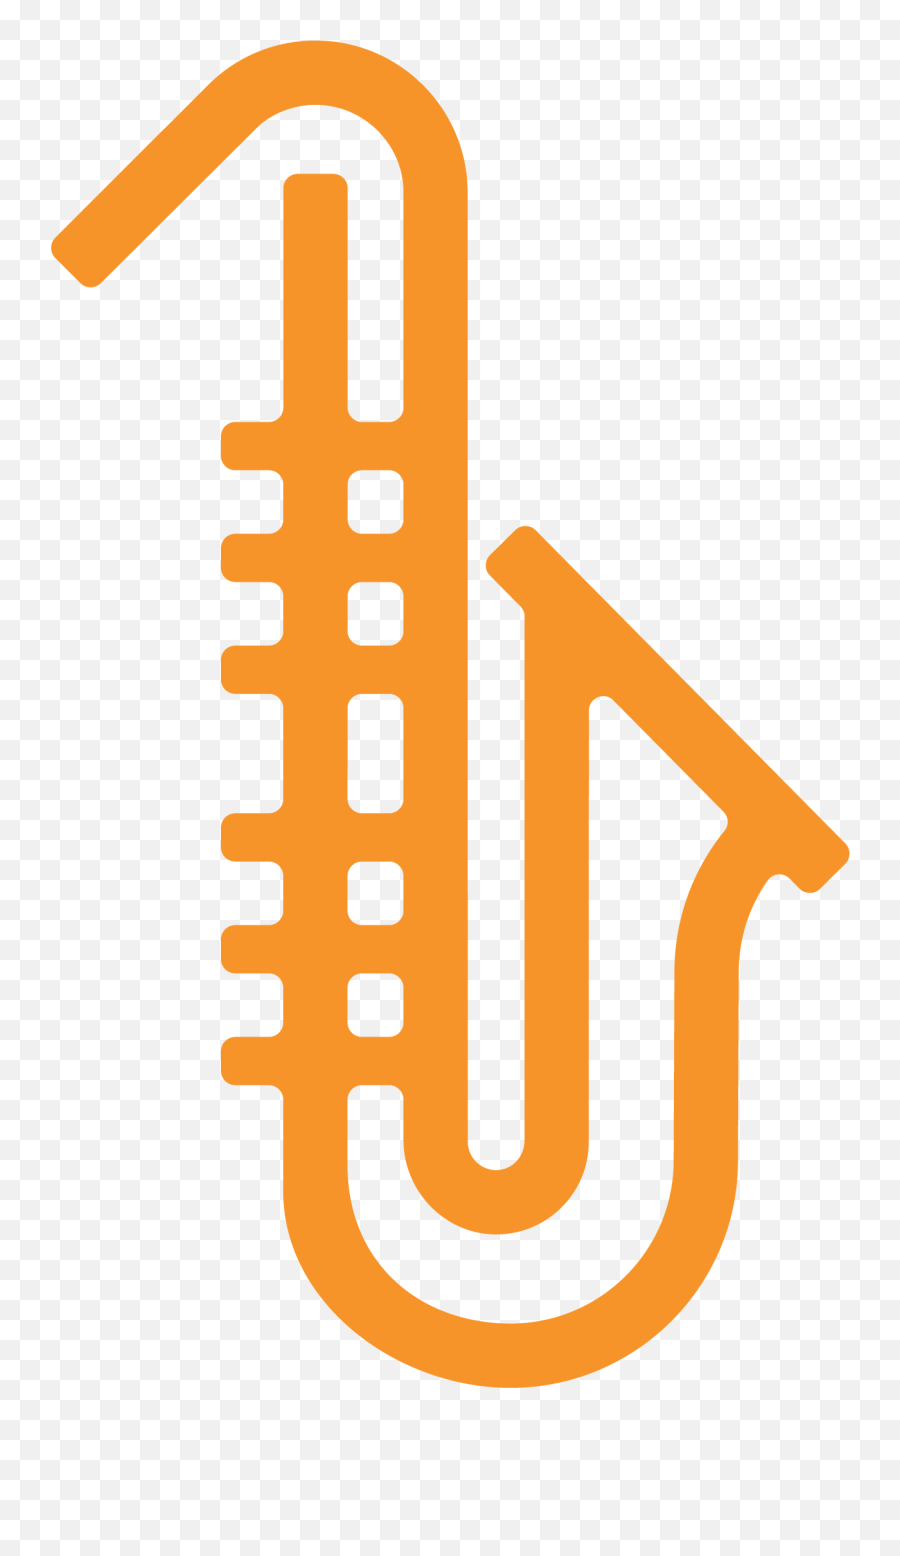 Download Lms Icon Sax 01 Png Image With No Background - Language,Trumpet Icon